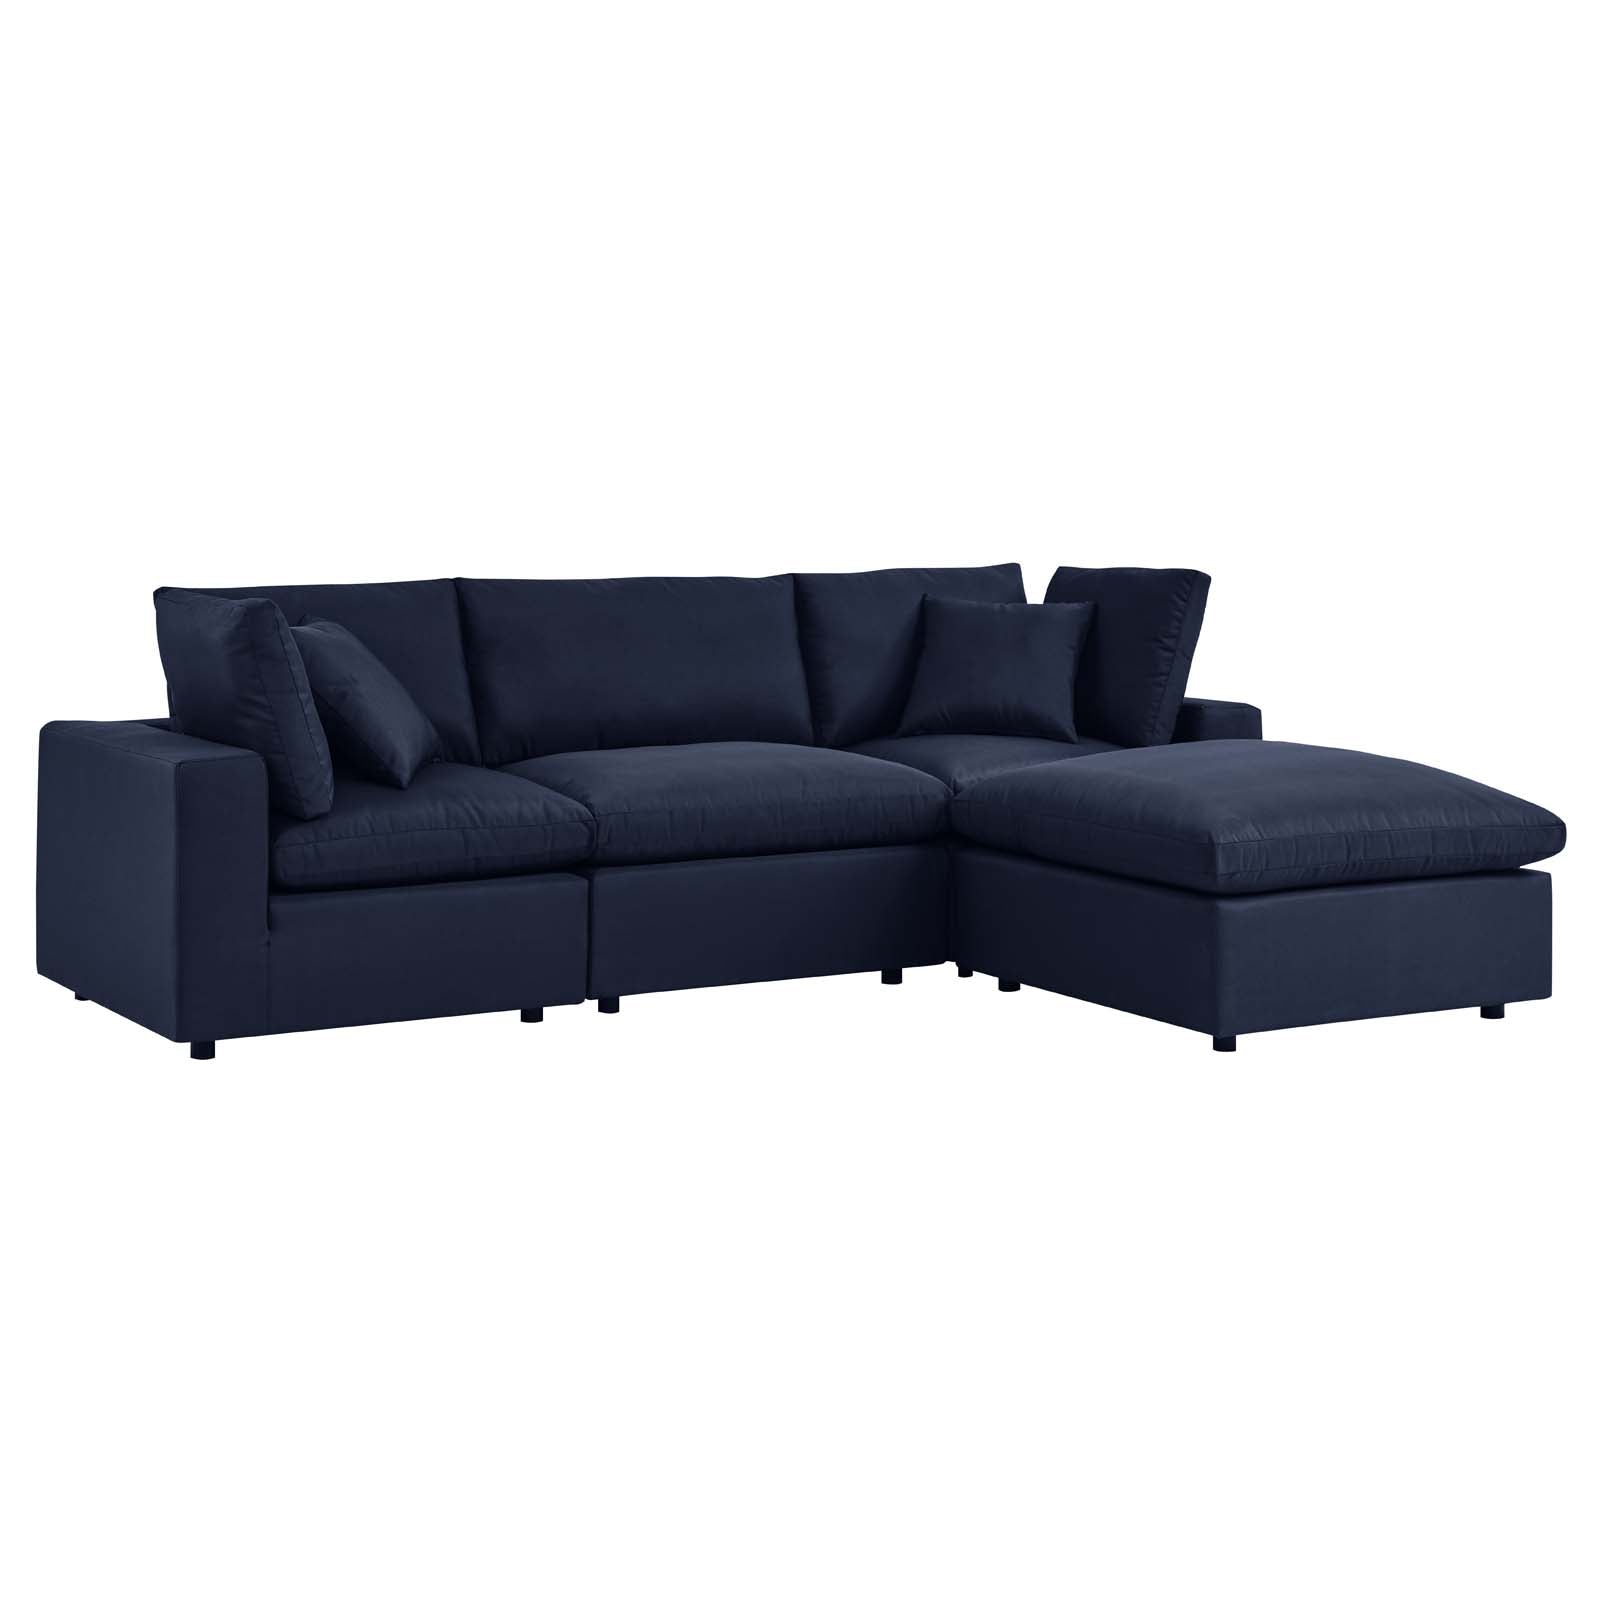 Commix 4-Piece Outdoor Patio Sectional Sofa-Outdoor Sectional-Modway-Wall2Wall Furnishings